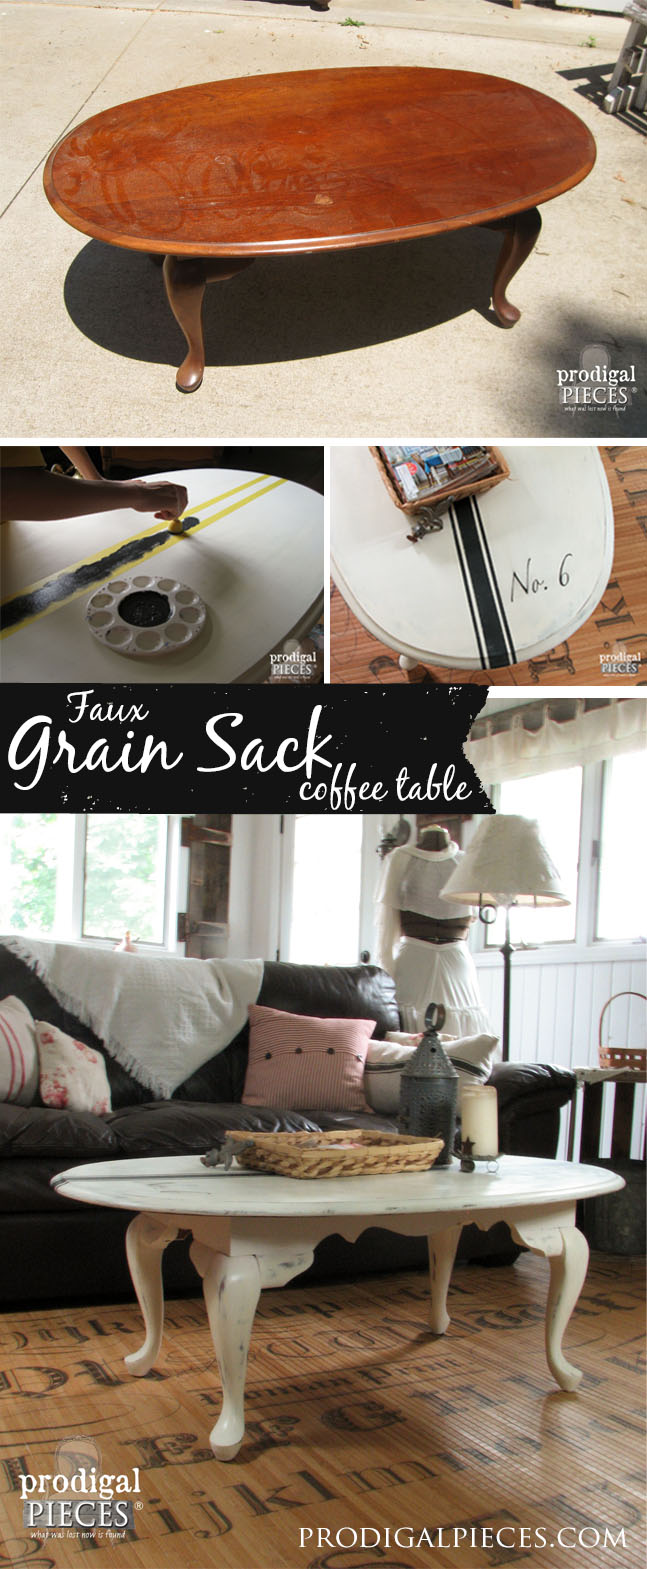 Create a Faux French Grain Sack Table with Tape and Paint - Let a teenager show you how! by Prodigal Pieces | prodigalpieces.com